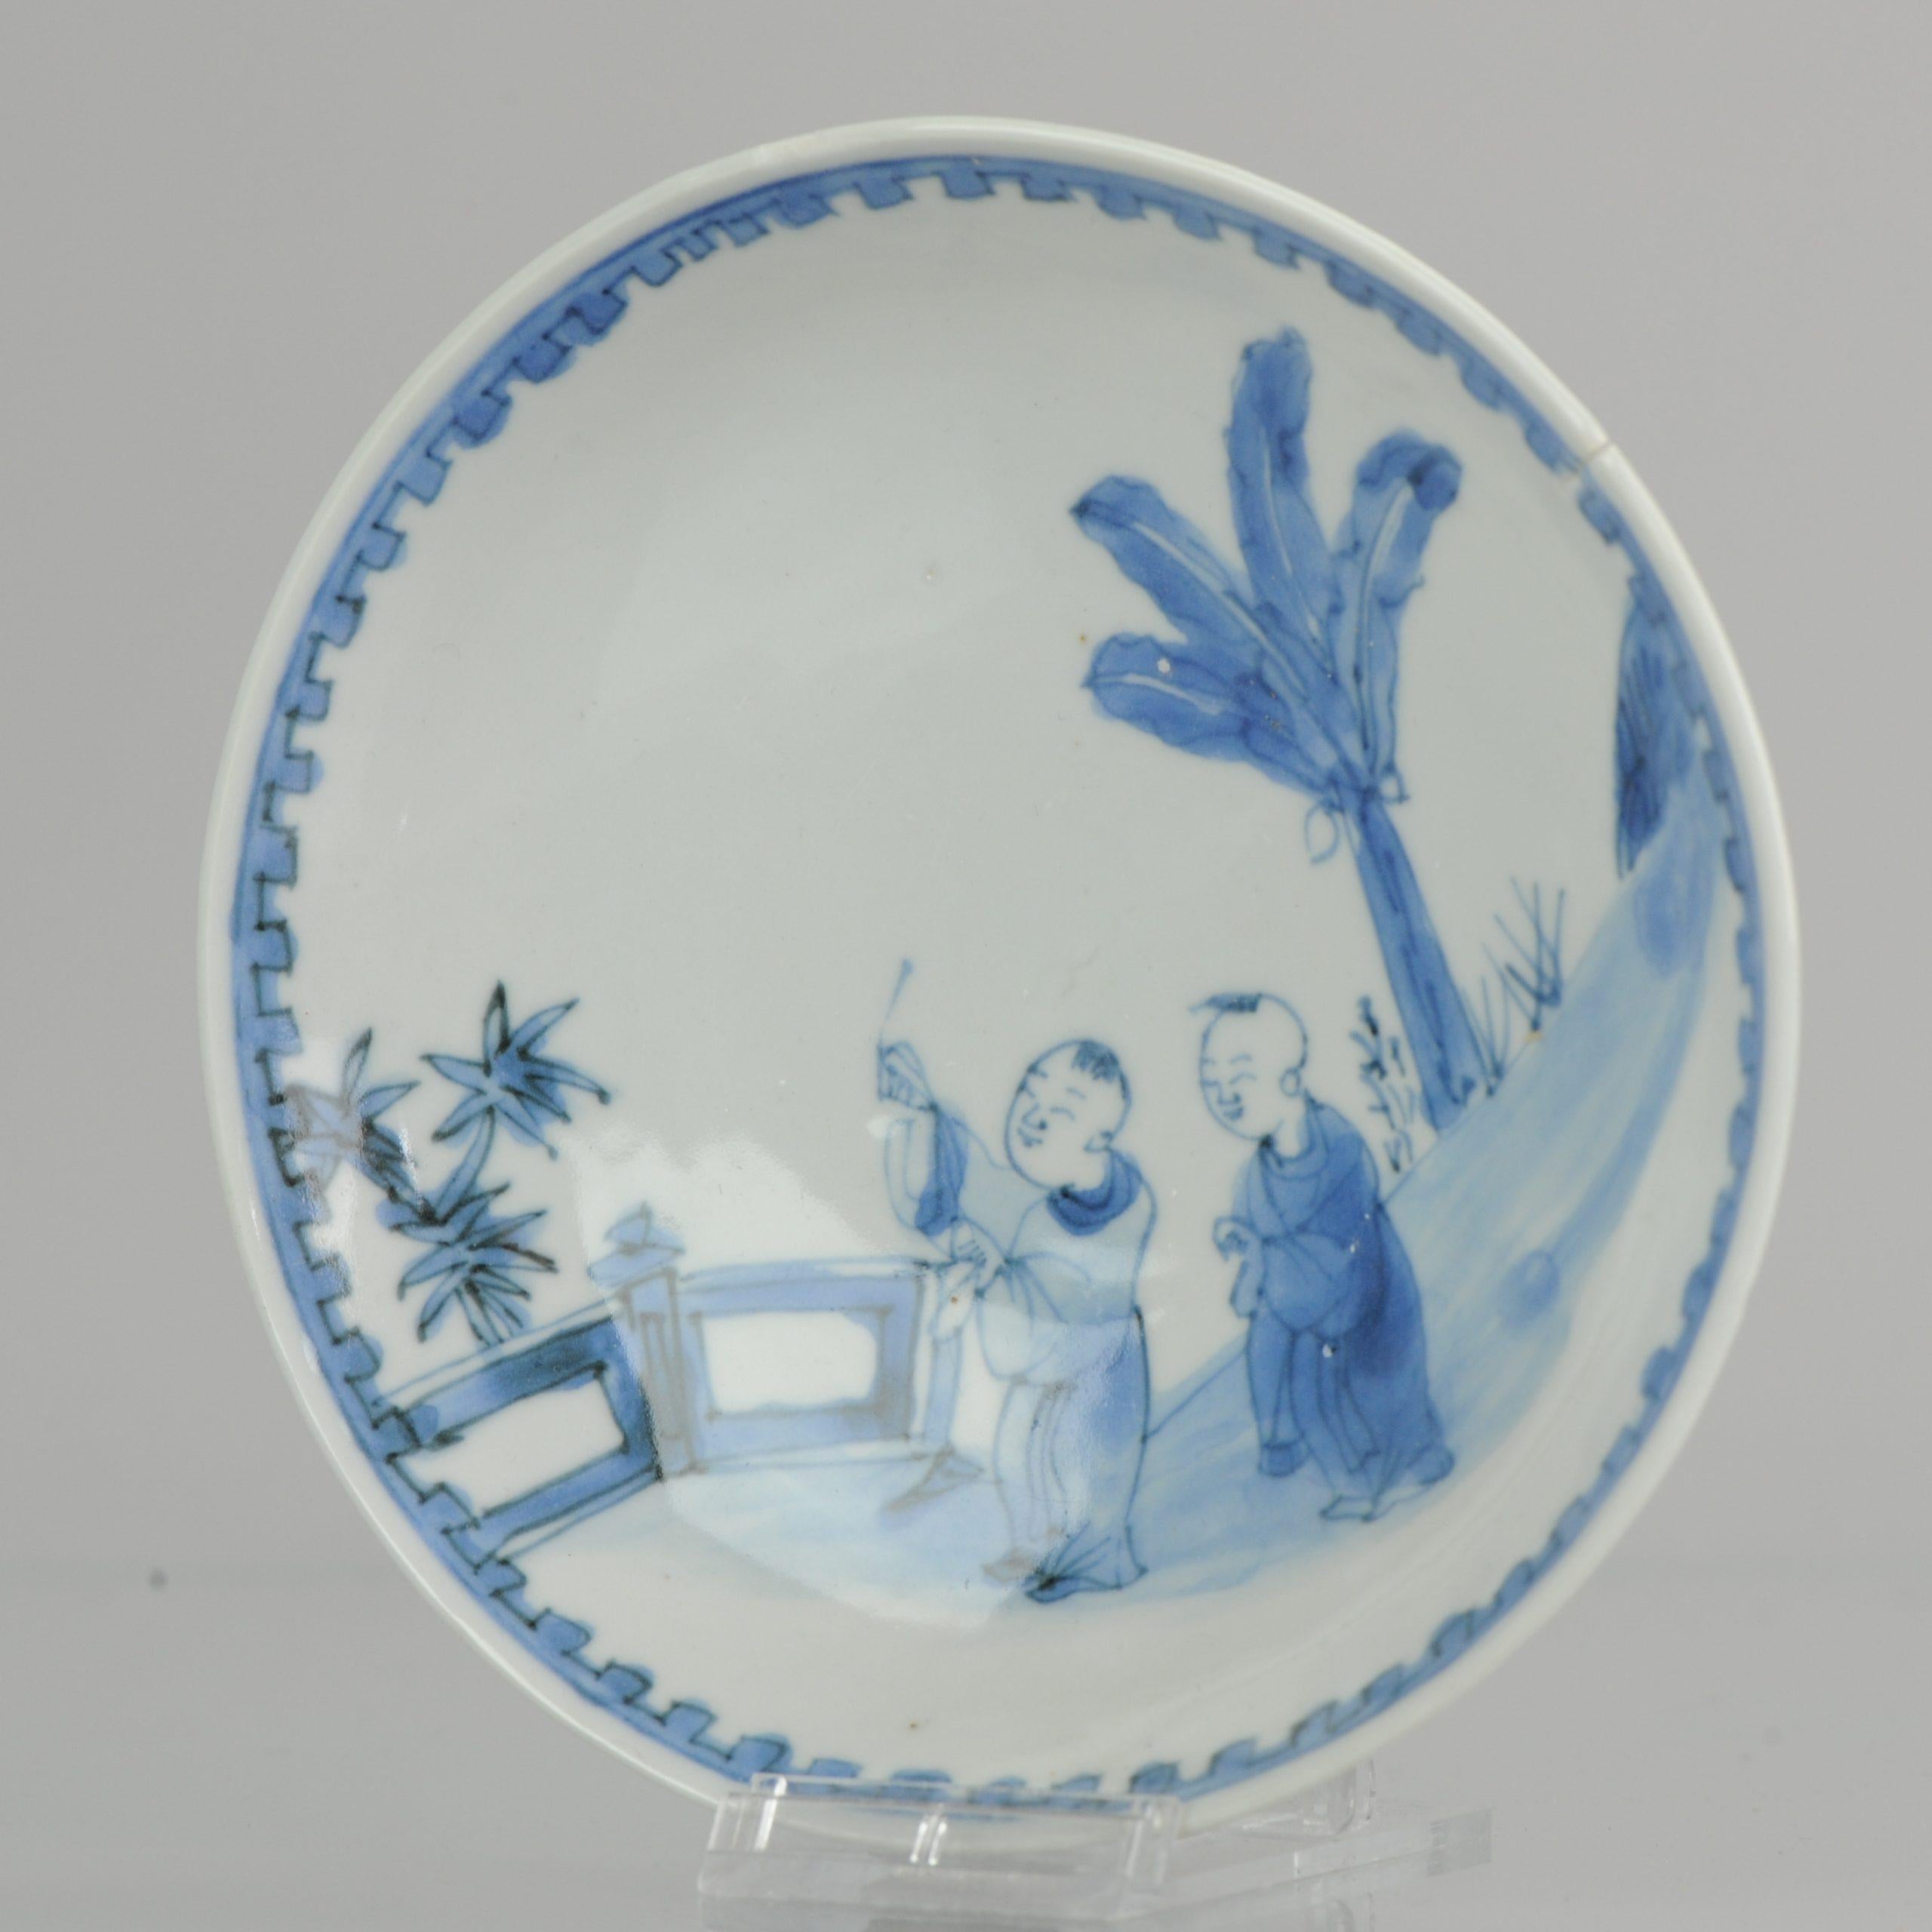 A late Ming blue and white porcelain dish, Tianqi or Chongzhen, period circa1620-1635. This small Transitional porcelain saucer-shaped dish would have been used for the Japanese tea ceremony meal, the Kaiseki, small dishes for serving food at the